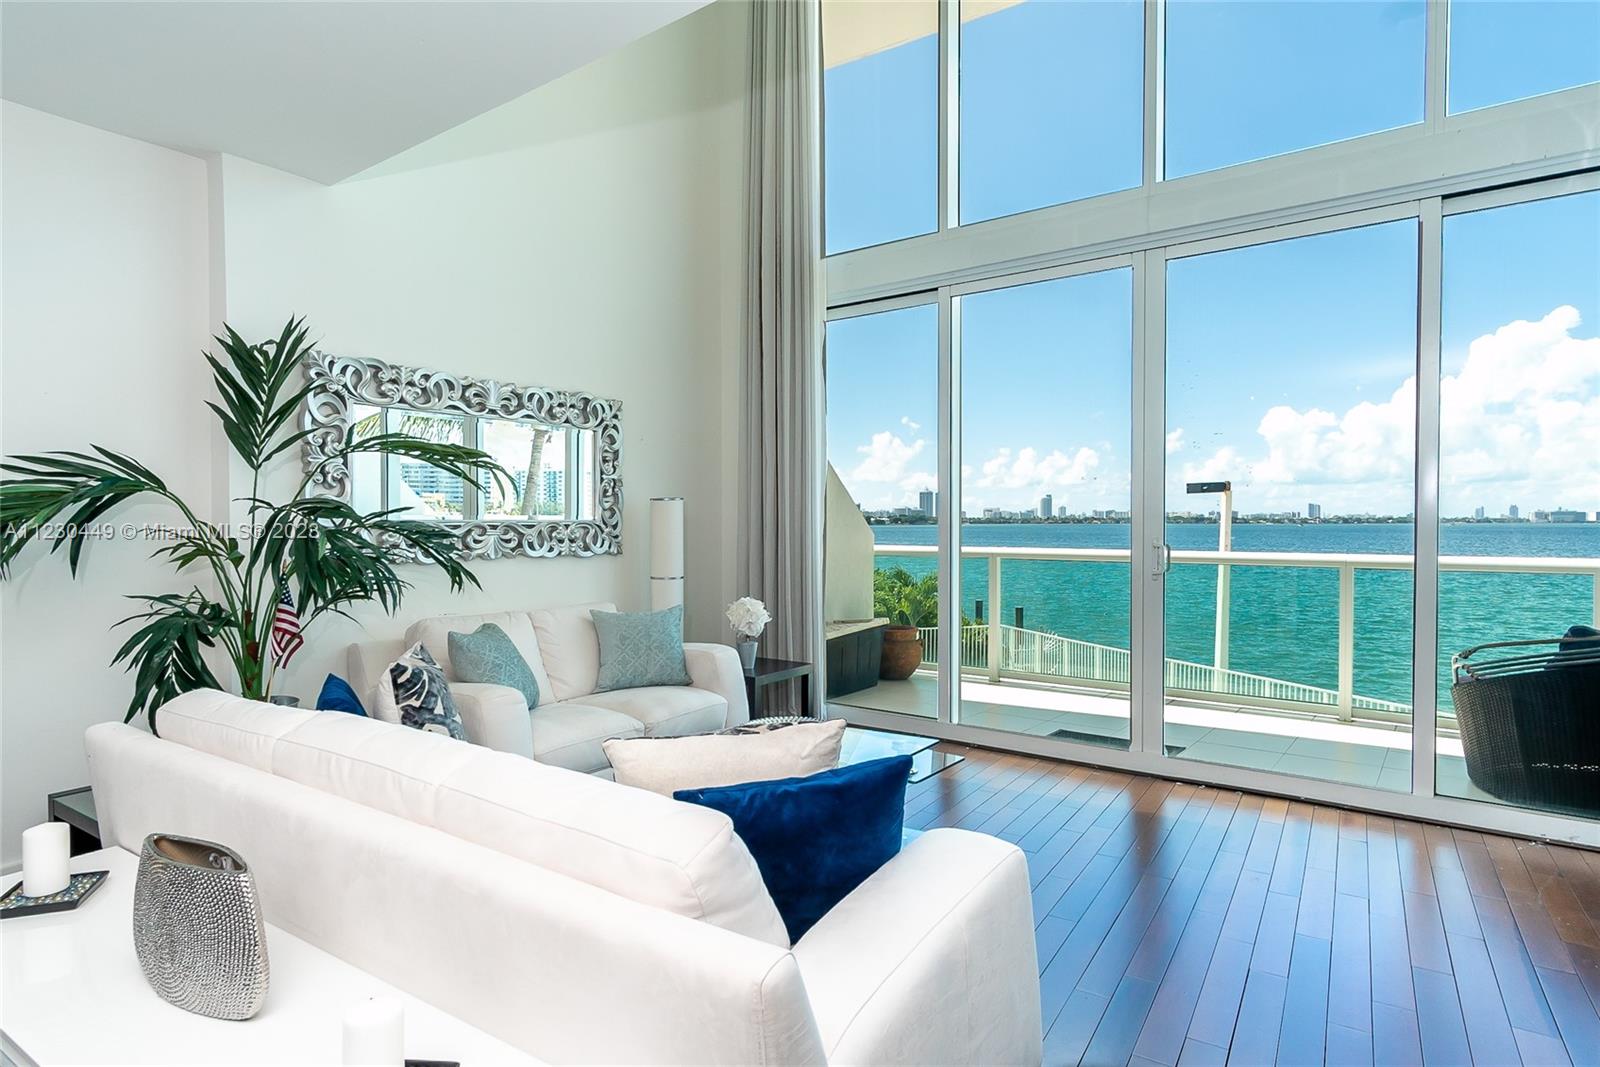 Fall in love with and make this your next dream home! Unobstructed & magnificent views of Biscayne Bay & downtown Miami through its private balcony. This incredible loft style unit boosts over 1,400 SF of living area, no room feels small! Eat in kitchen with SS appliances. Two master bedrooms, walk-in closet, wood flooring throughout. Half bath on the 1st floor & a huge storage/pantry. Gated & covered parking. Bay View Lofts is an elegant & luxurious boutique condo conveniently located on Normandy Isles. Amenities include swimming pool with a spectacular deck overlooking the bay, fitness center & sauna. 5 min drive to the beach, A+ schools, entertainment, minutes drive to the exclusive Bal Harbor shops & the Miami International airport. Walgreens & gas station within walking distance.